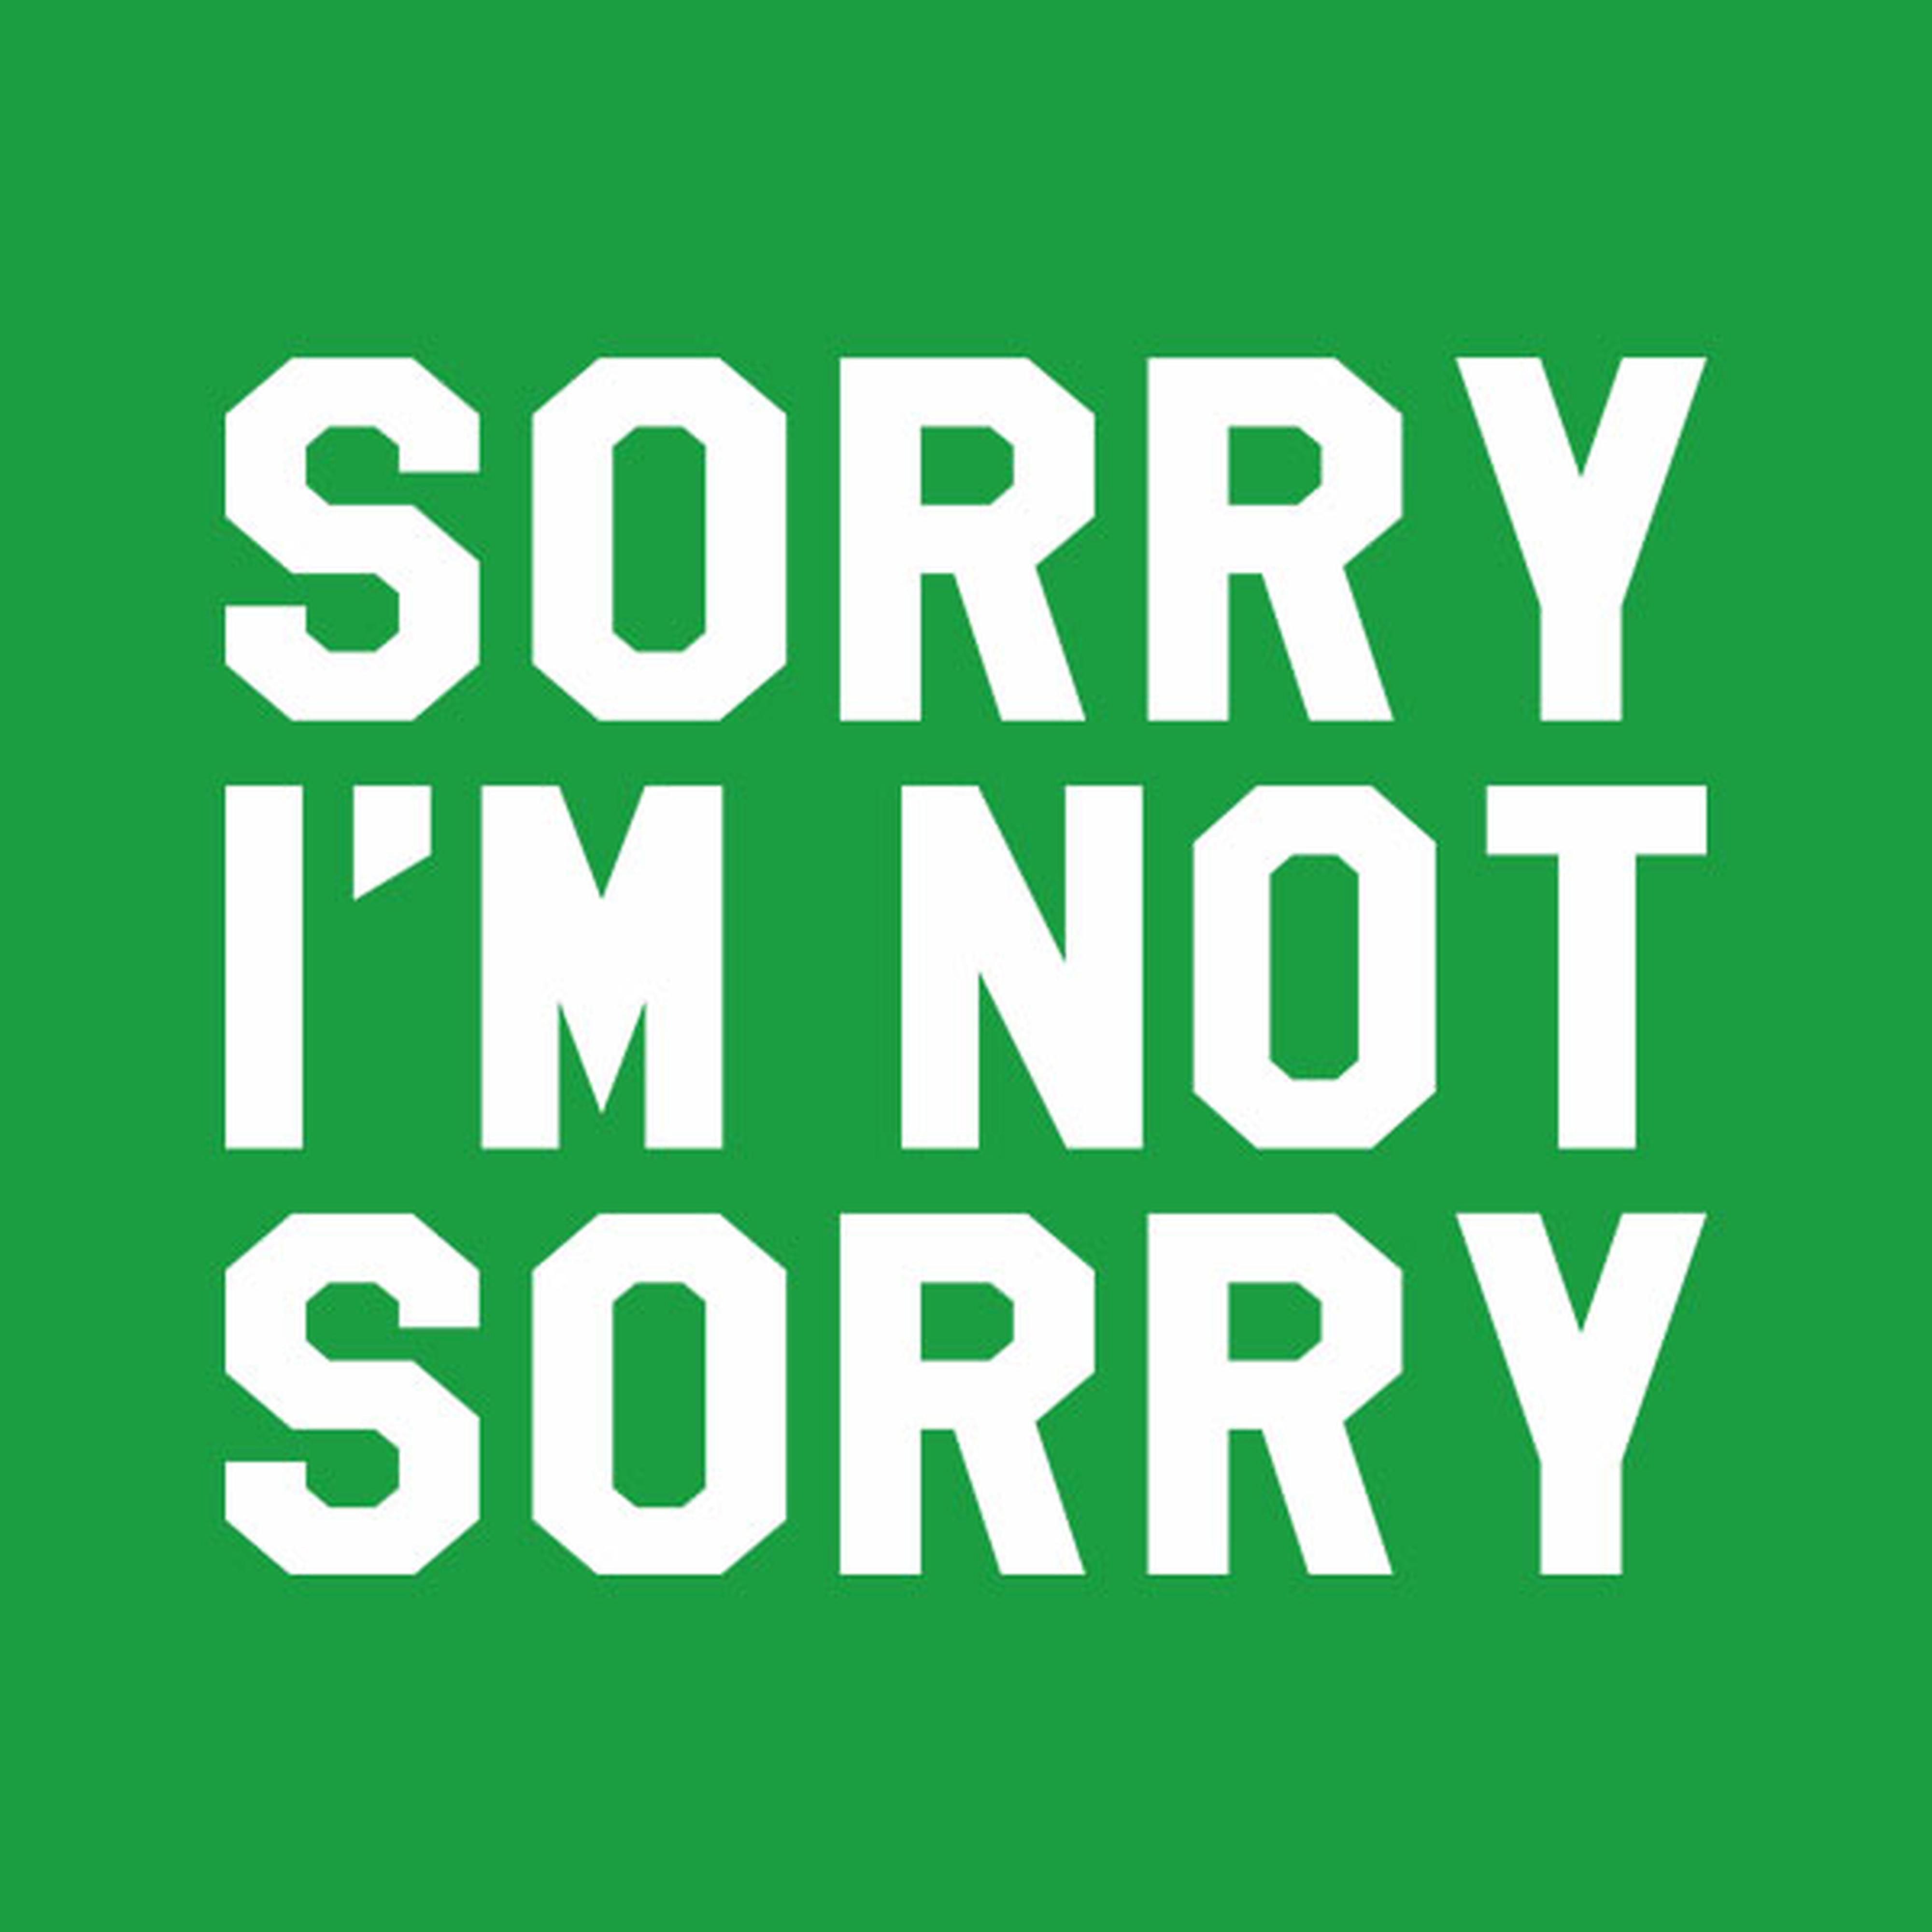 funny-t-shirt-sorry-i-am-not-sorry